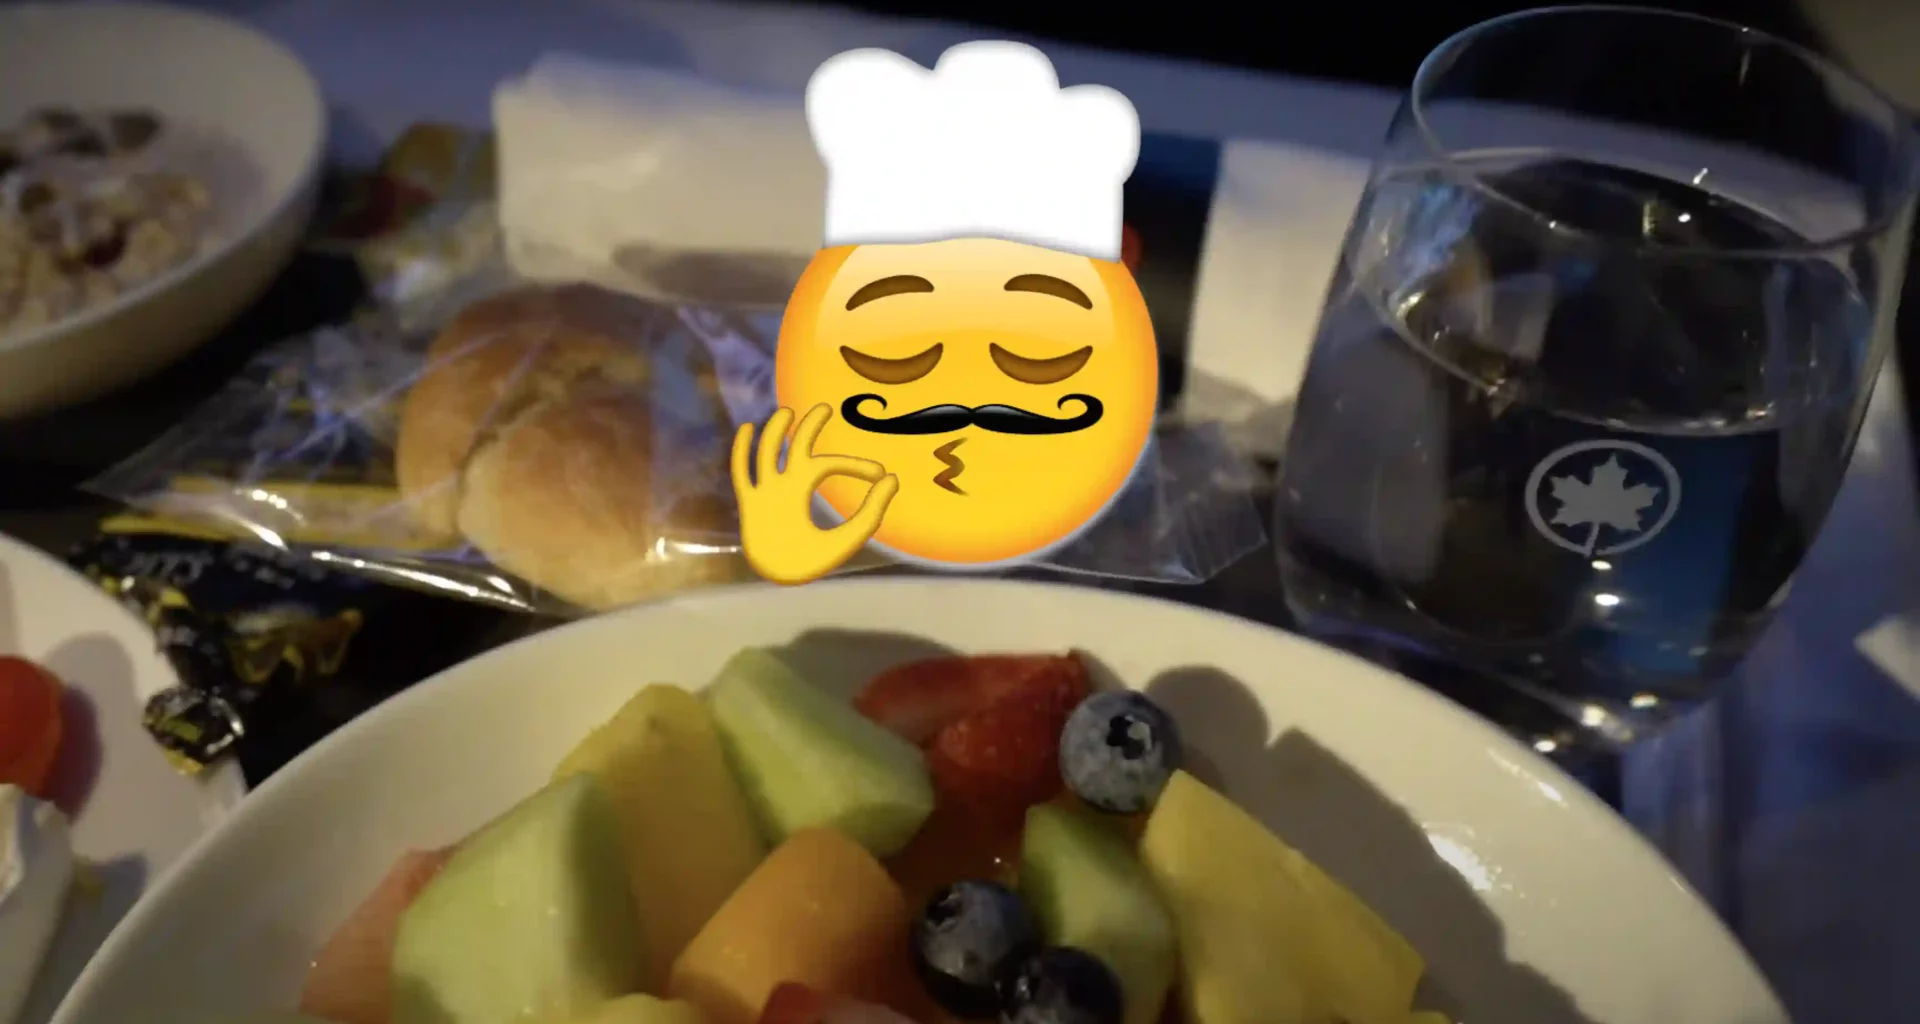 Air Canada business class breakfast with superimposed chef's kiss emoji